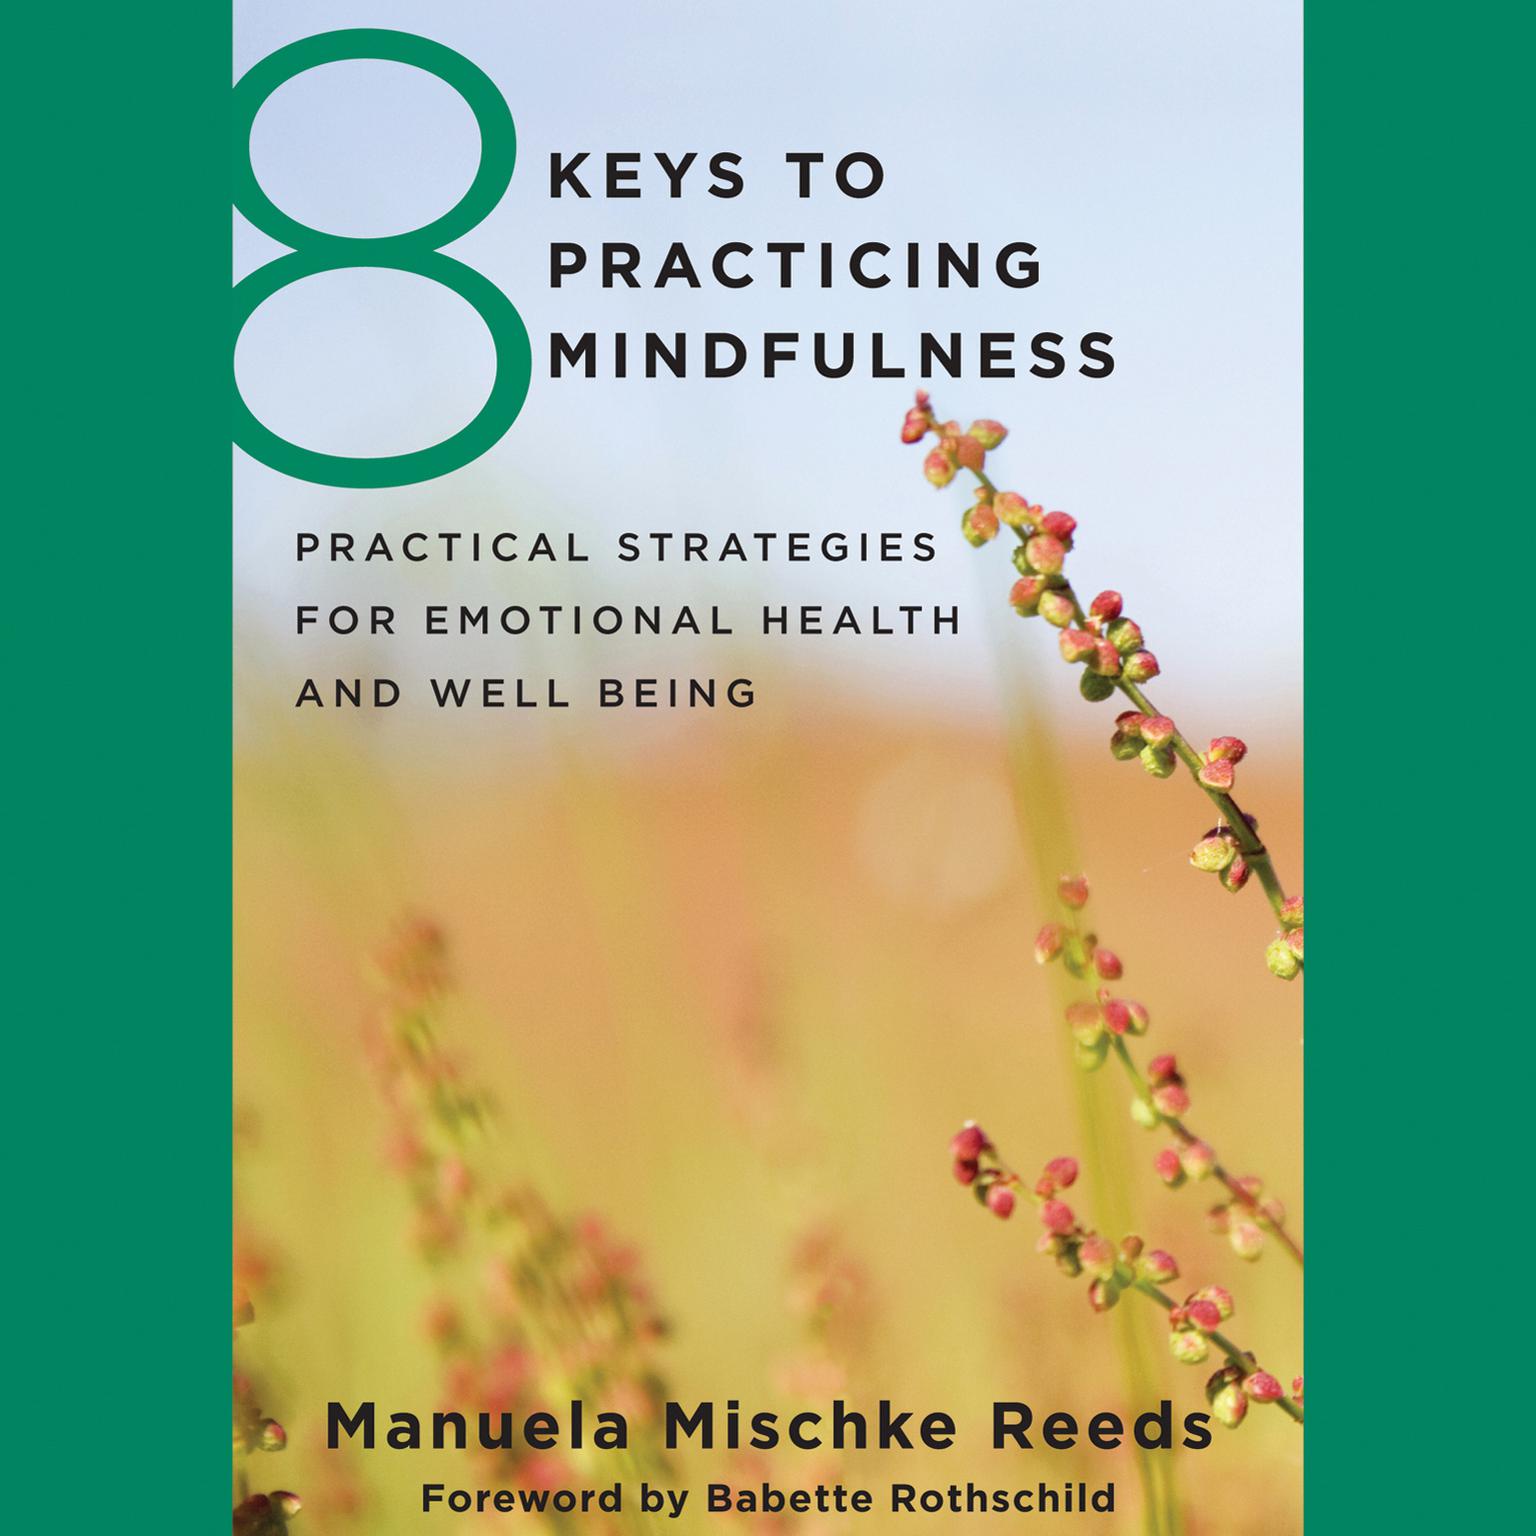 8 Keys to Practicing Mindfulness: Practical Strategies for Emotional Health and Well-Being Audiobook, by Manuela Mischke Reeds